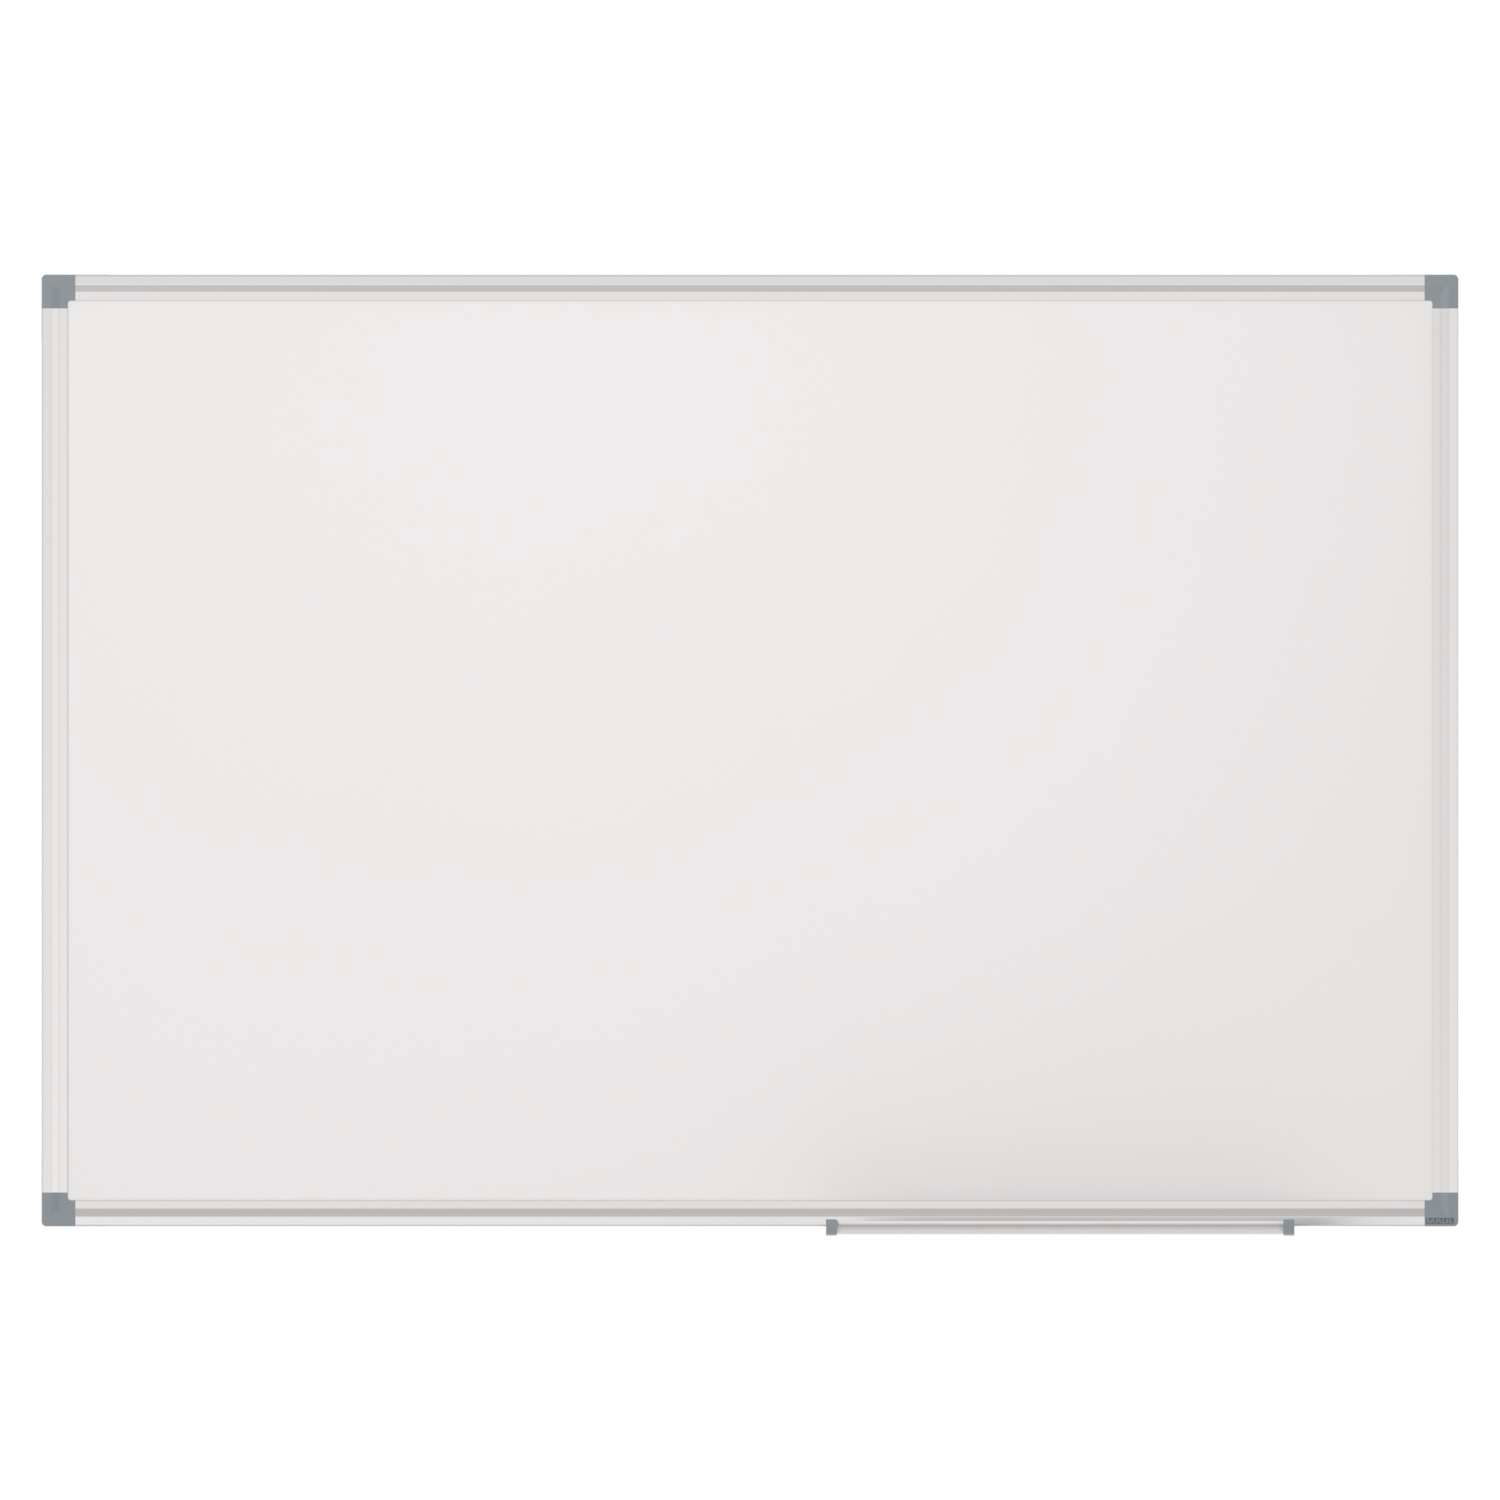 Whiteboard MAULstandard, Emaille, 100x150 cm